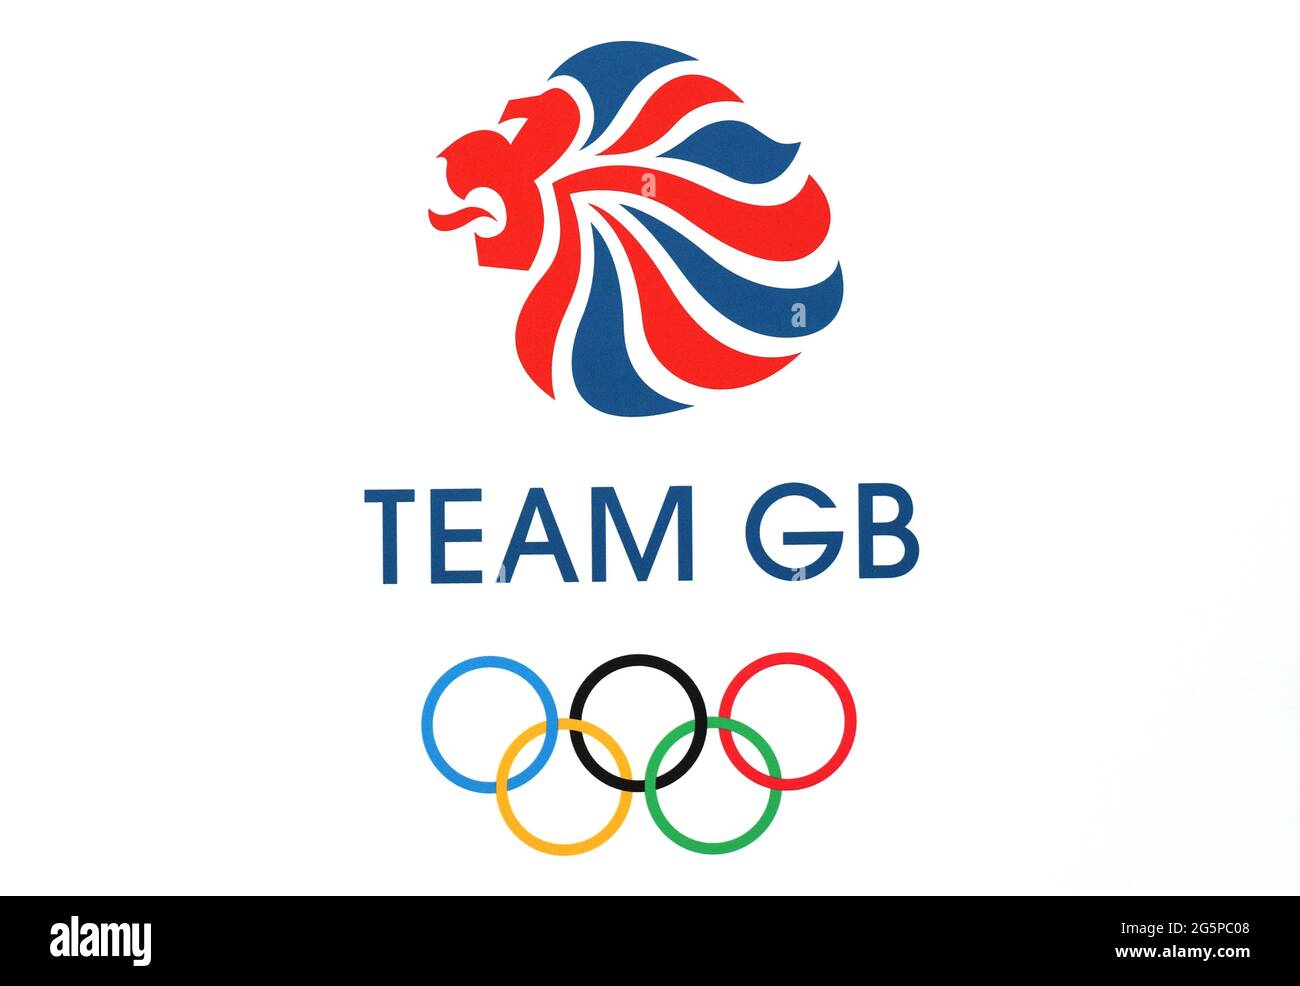 Team gb olympics 2021 Cut Out Stock Images & Pictures Alamy